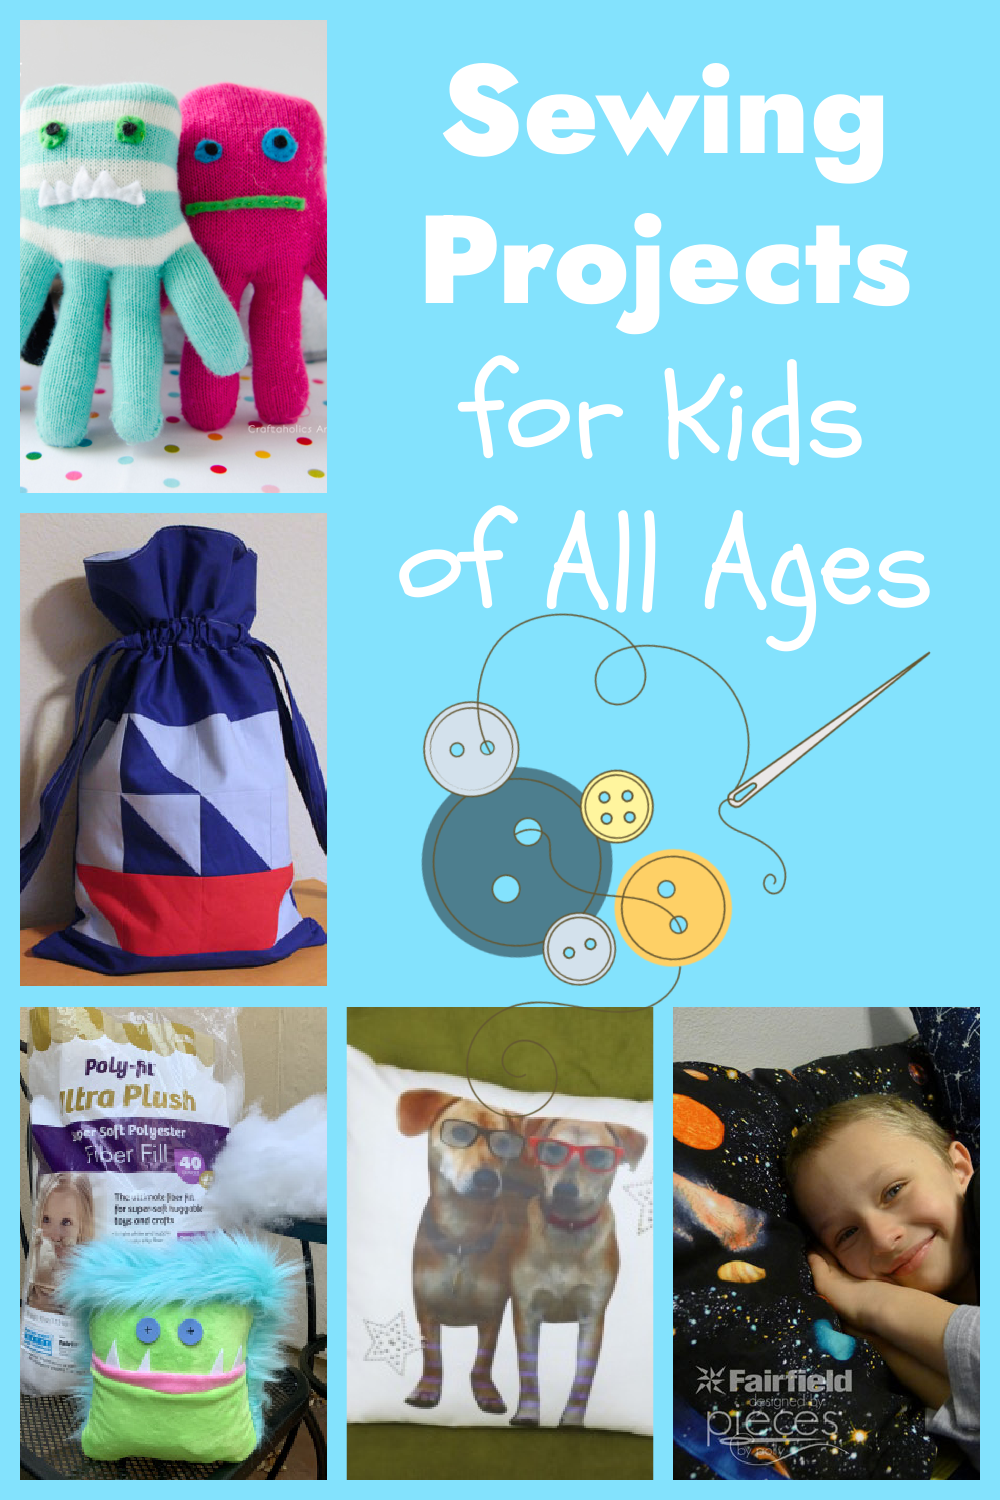 Sewing Projects for Kids of All Ages